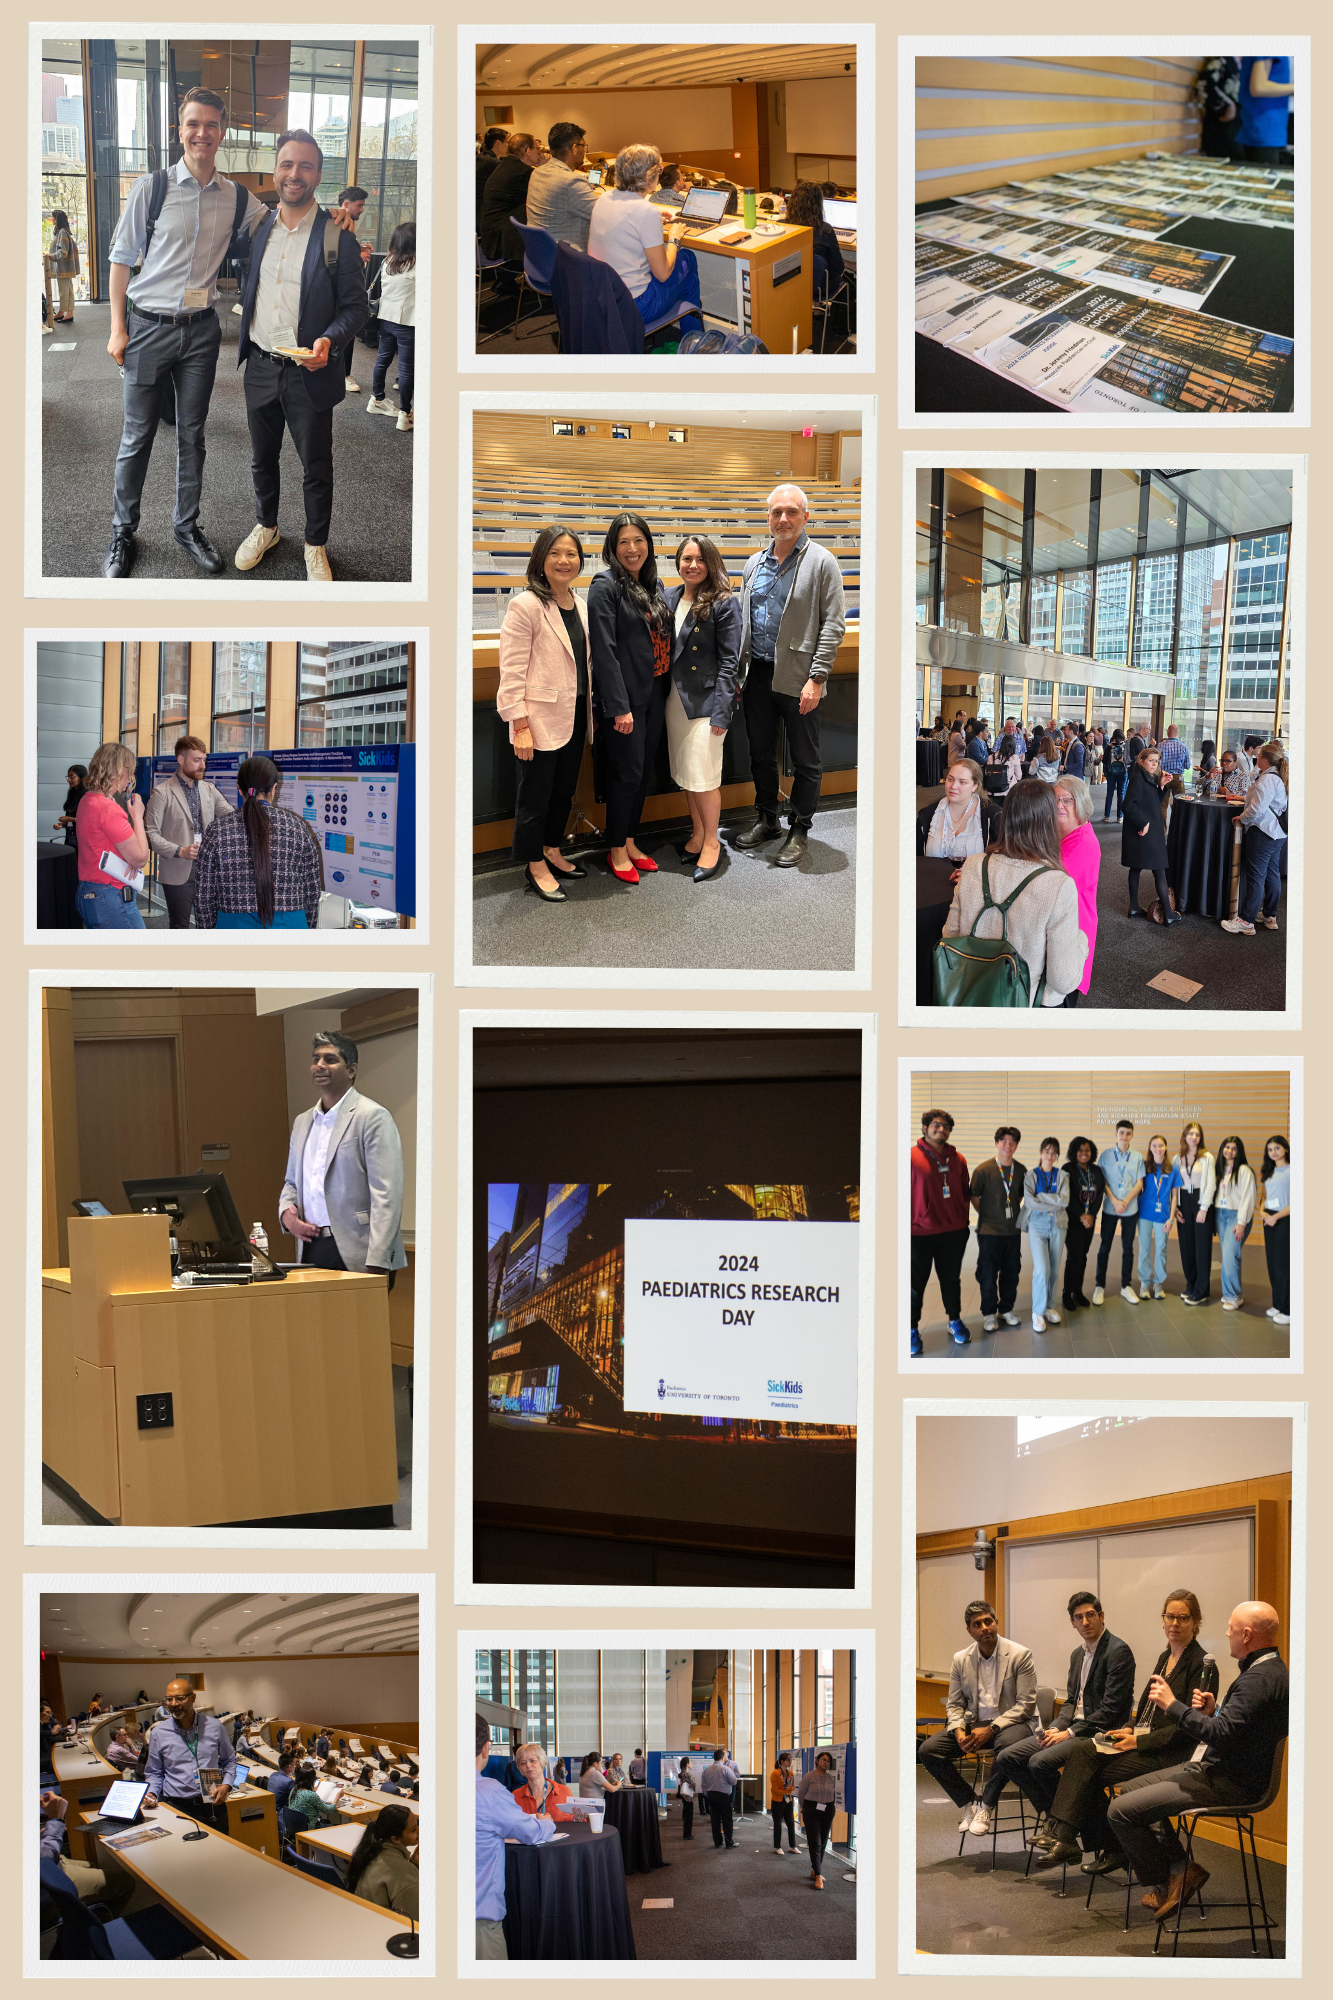 images from the 2024 Paediatrics Research Day Event